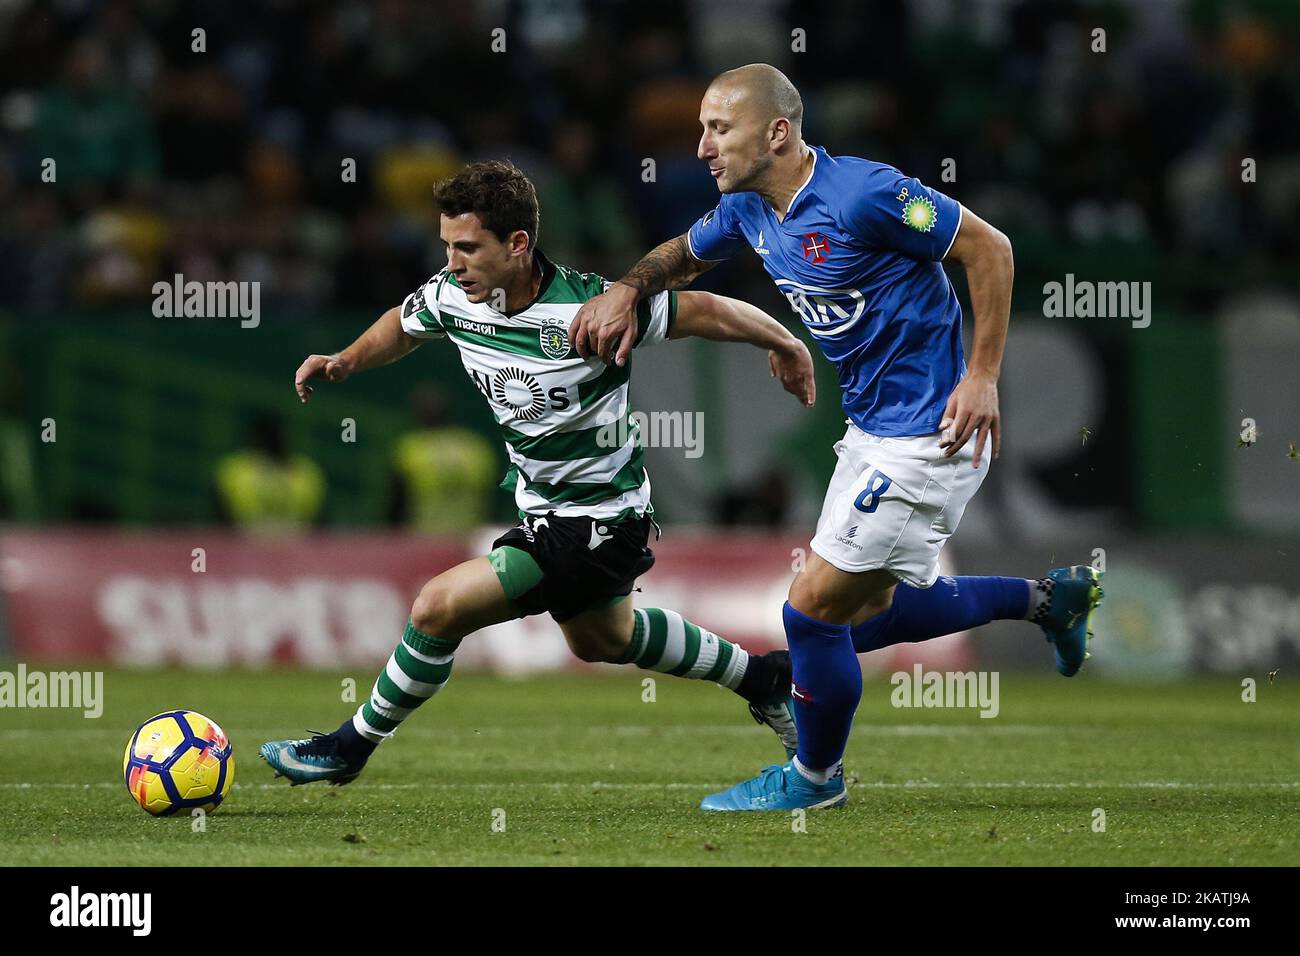 Sporting's forward Daniel Podence (L) vies for the ball with Belenenses's midfielder Andre Sousa (R) during Primeira Liga 2017/18 match between Sporting CP vs CF Belenenses, in Lisbon, on December 1, 2017. (Photo by Carlos Palma/NurPhoto) Stock Photo